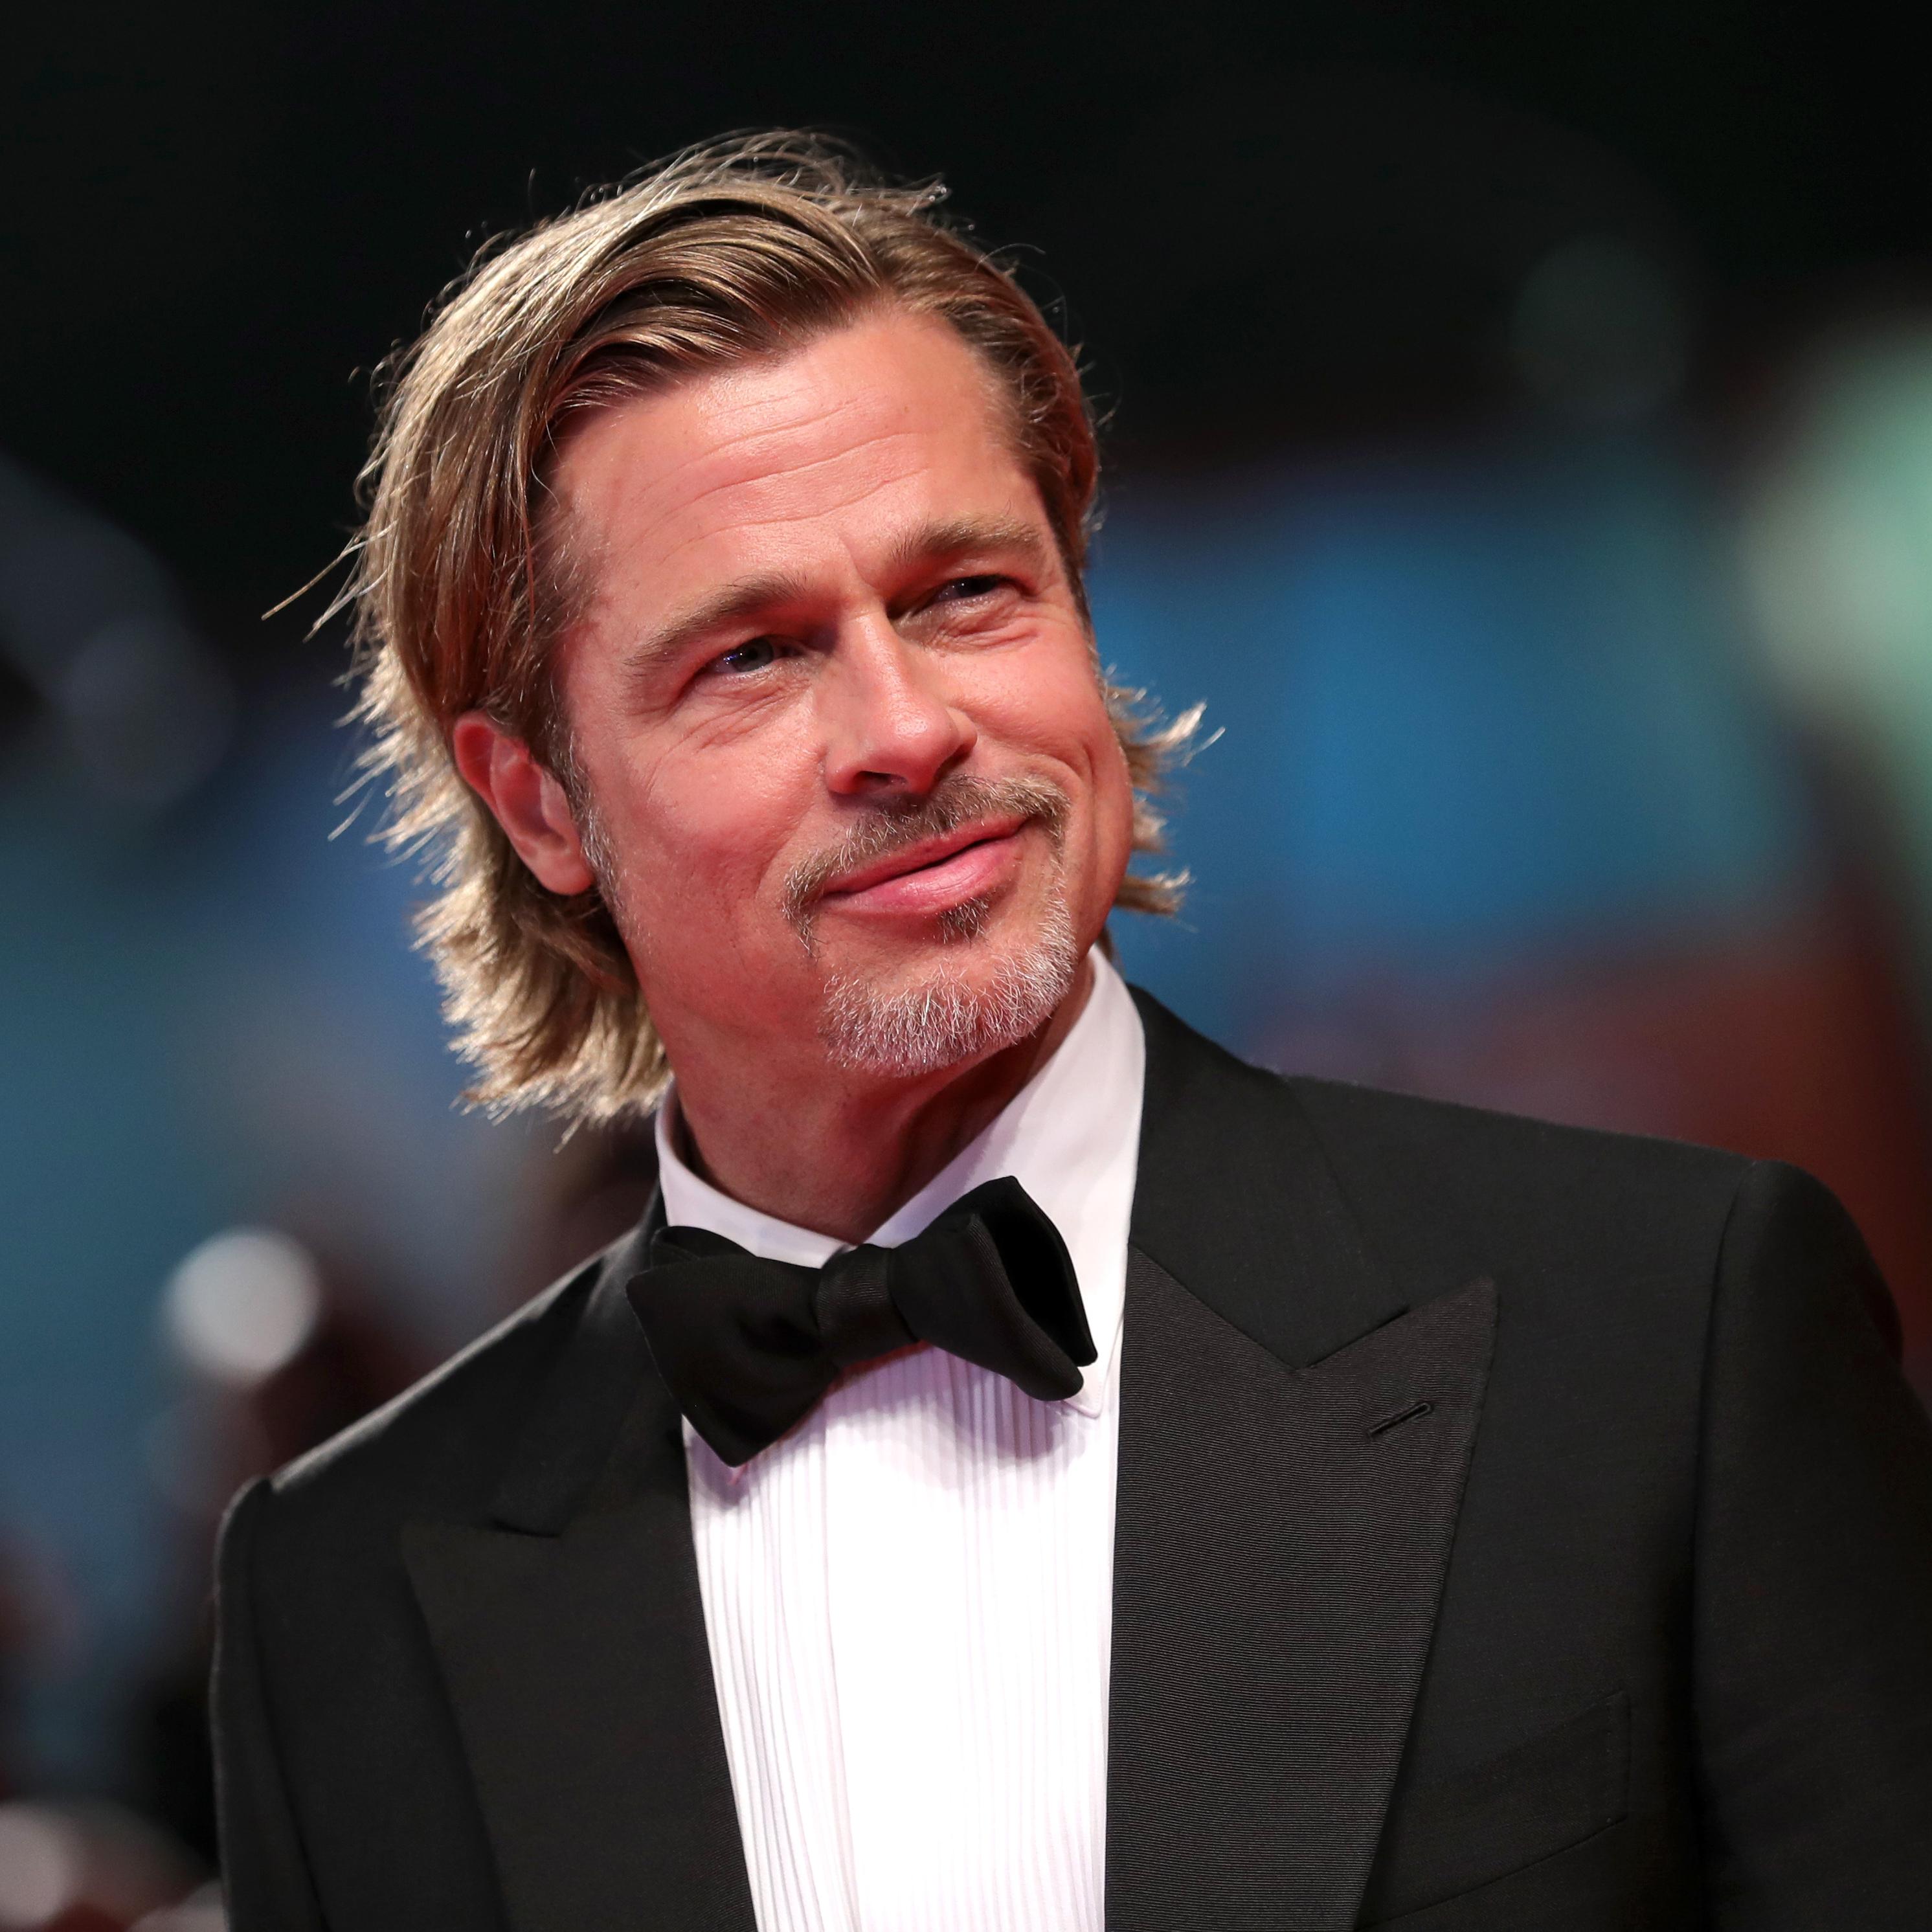 Latest Gesture from Brad Pitt May Indicate He’s Trying to Win Back Jennifer Anniston